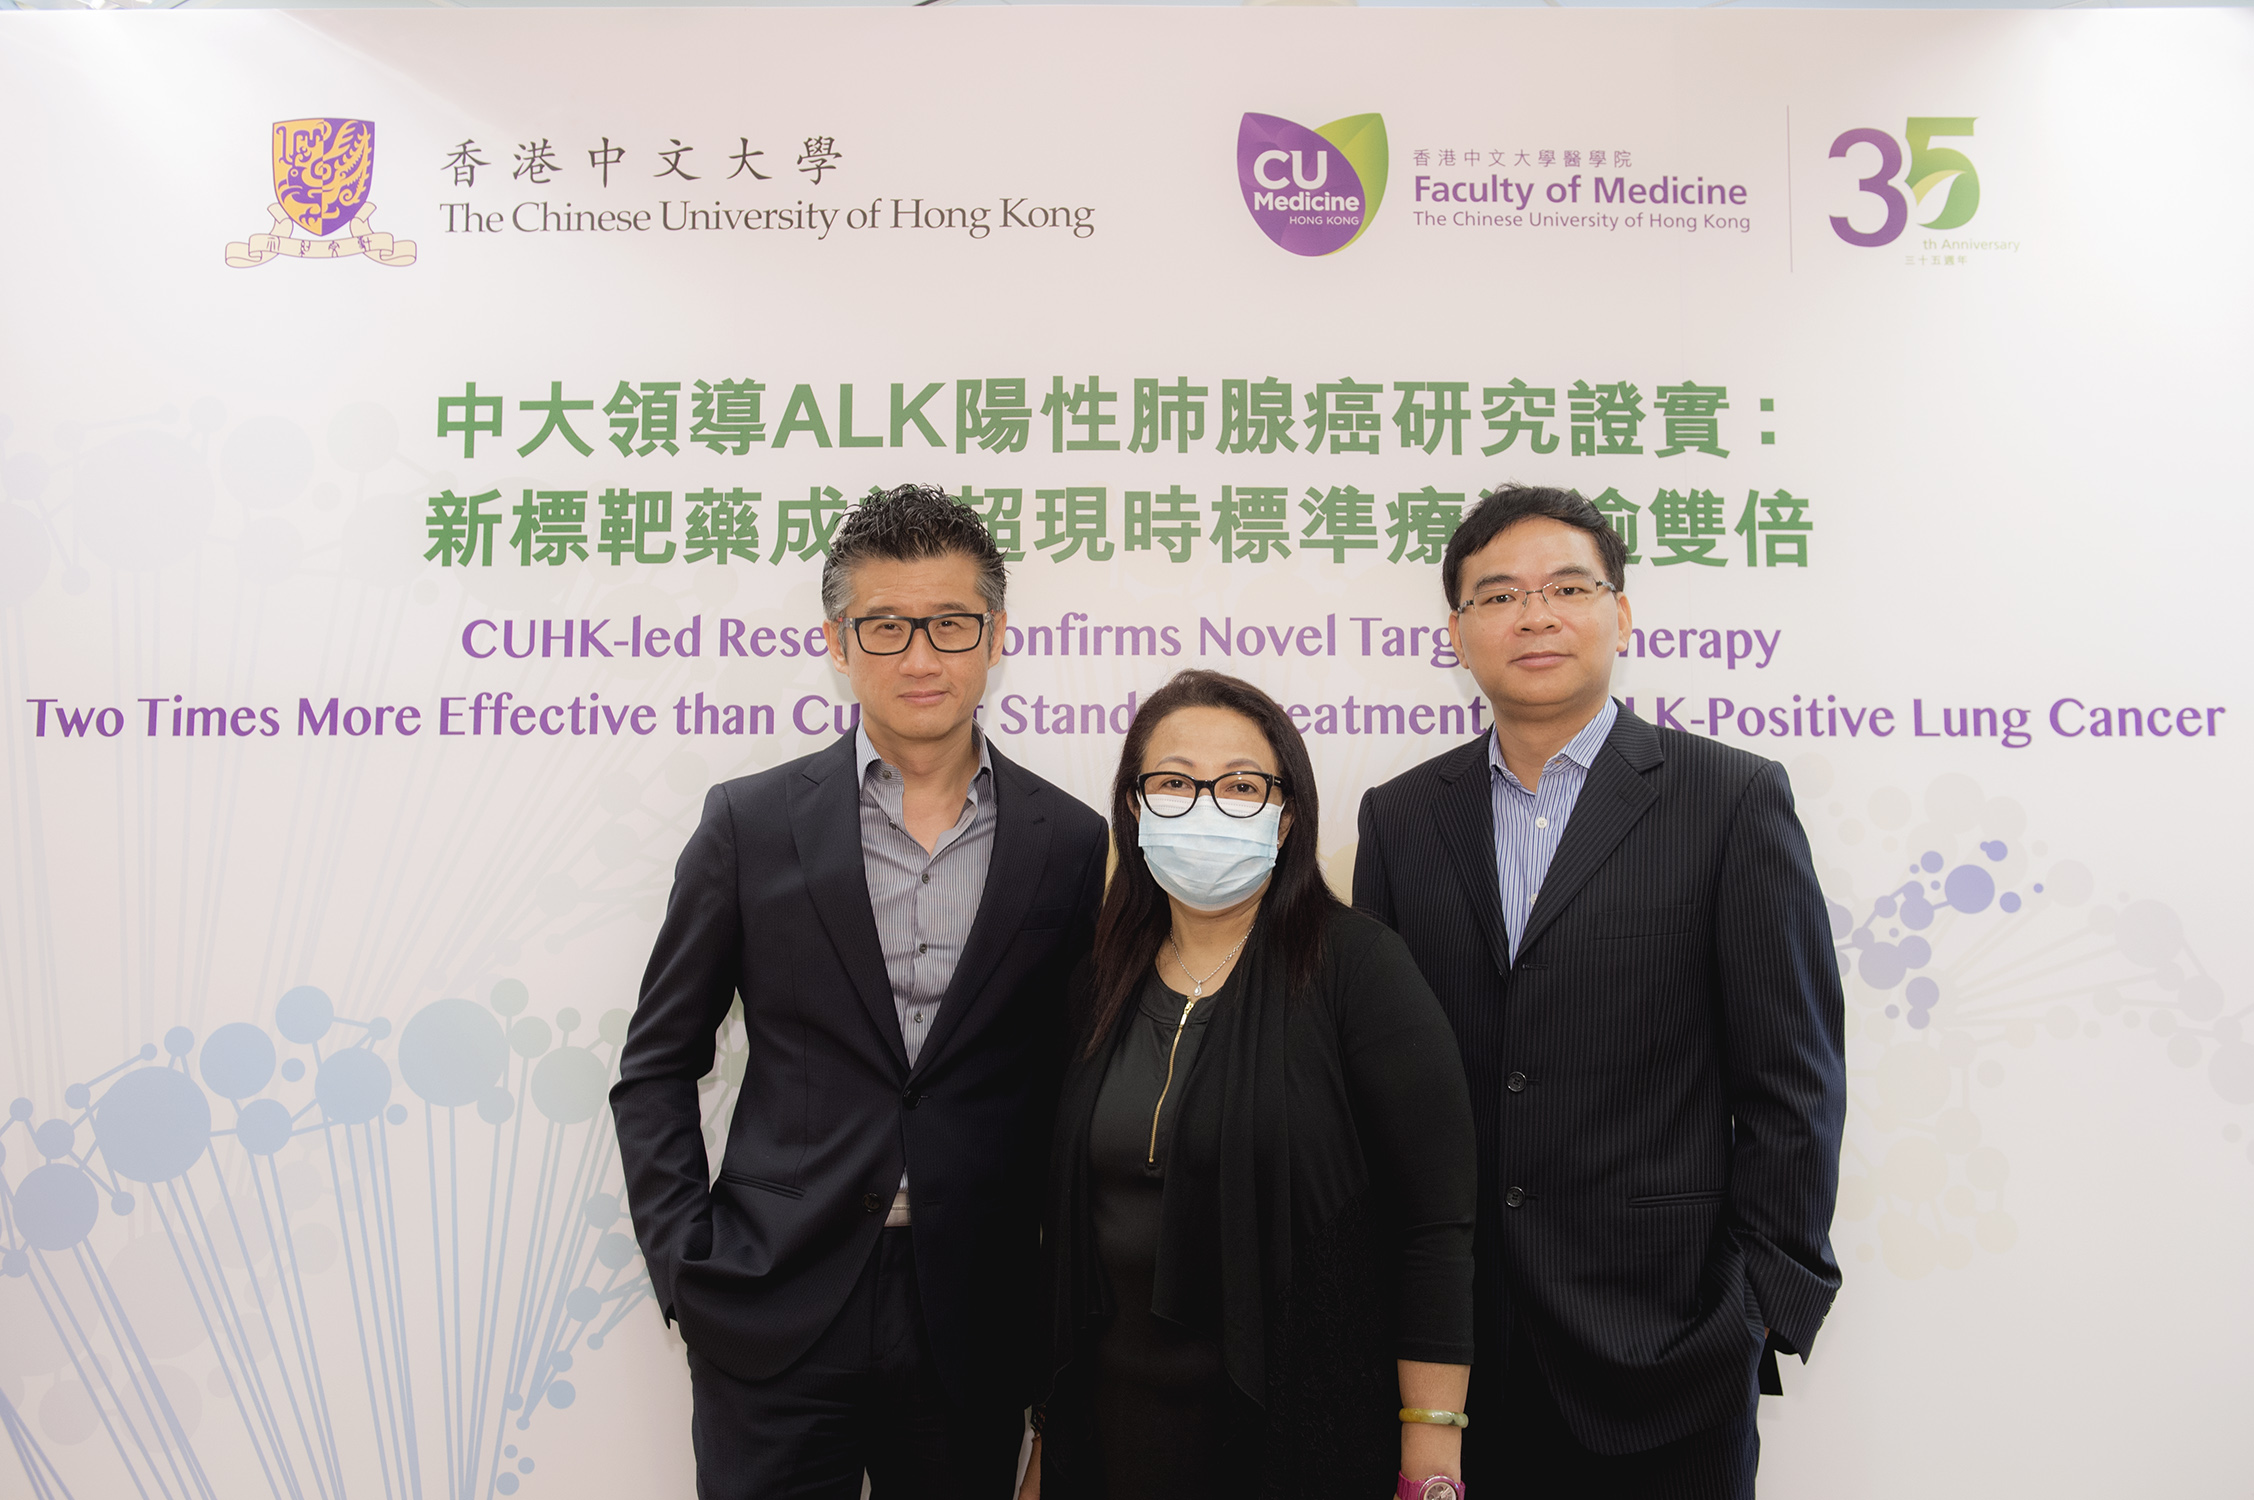 A multinational study led by Prof. Tony Shu Kam MOK, Li Shu Fan Medical Foundation Professor of Clinical Oncology and Chairman of the Department of Clinical Oncology of the Faculty of Medicine of CUHK (left), has confirmed a novel targeted therapy can extend the progression-free survival time (median) more than a double compared to the current standard treatment for advanced ALK-positive lung cancer patients, and at the same time, lower the chance of brain metastases. Also featured in the picture are ALK-positive lung cancer patient Madam TAM (centre) and Dr LAM Kwok Chi, Clinical Assistant Professor (Honorary), Department of Clinical Oncology, Faculty of Medicine at CUHK (right).